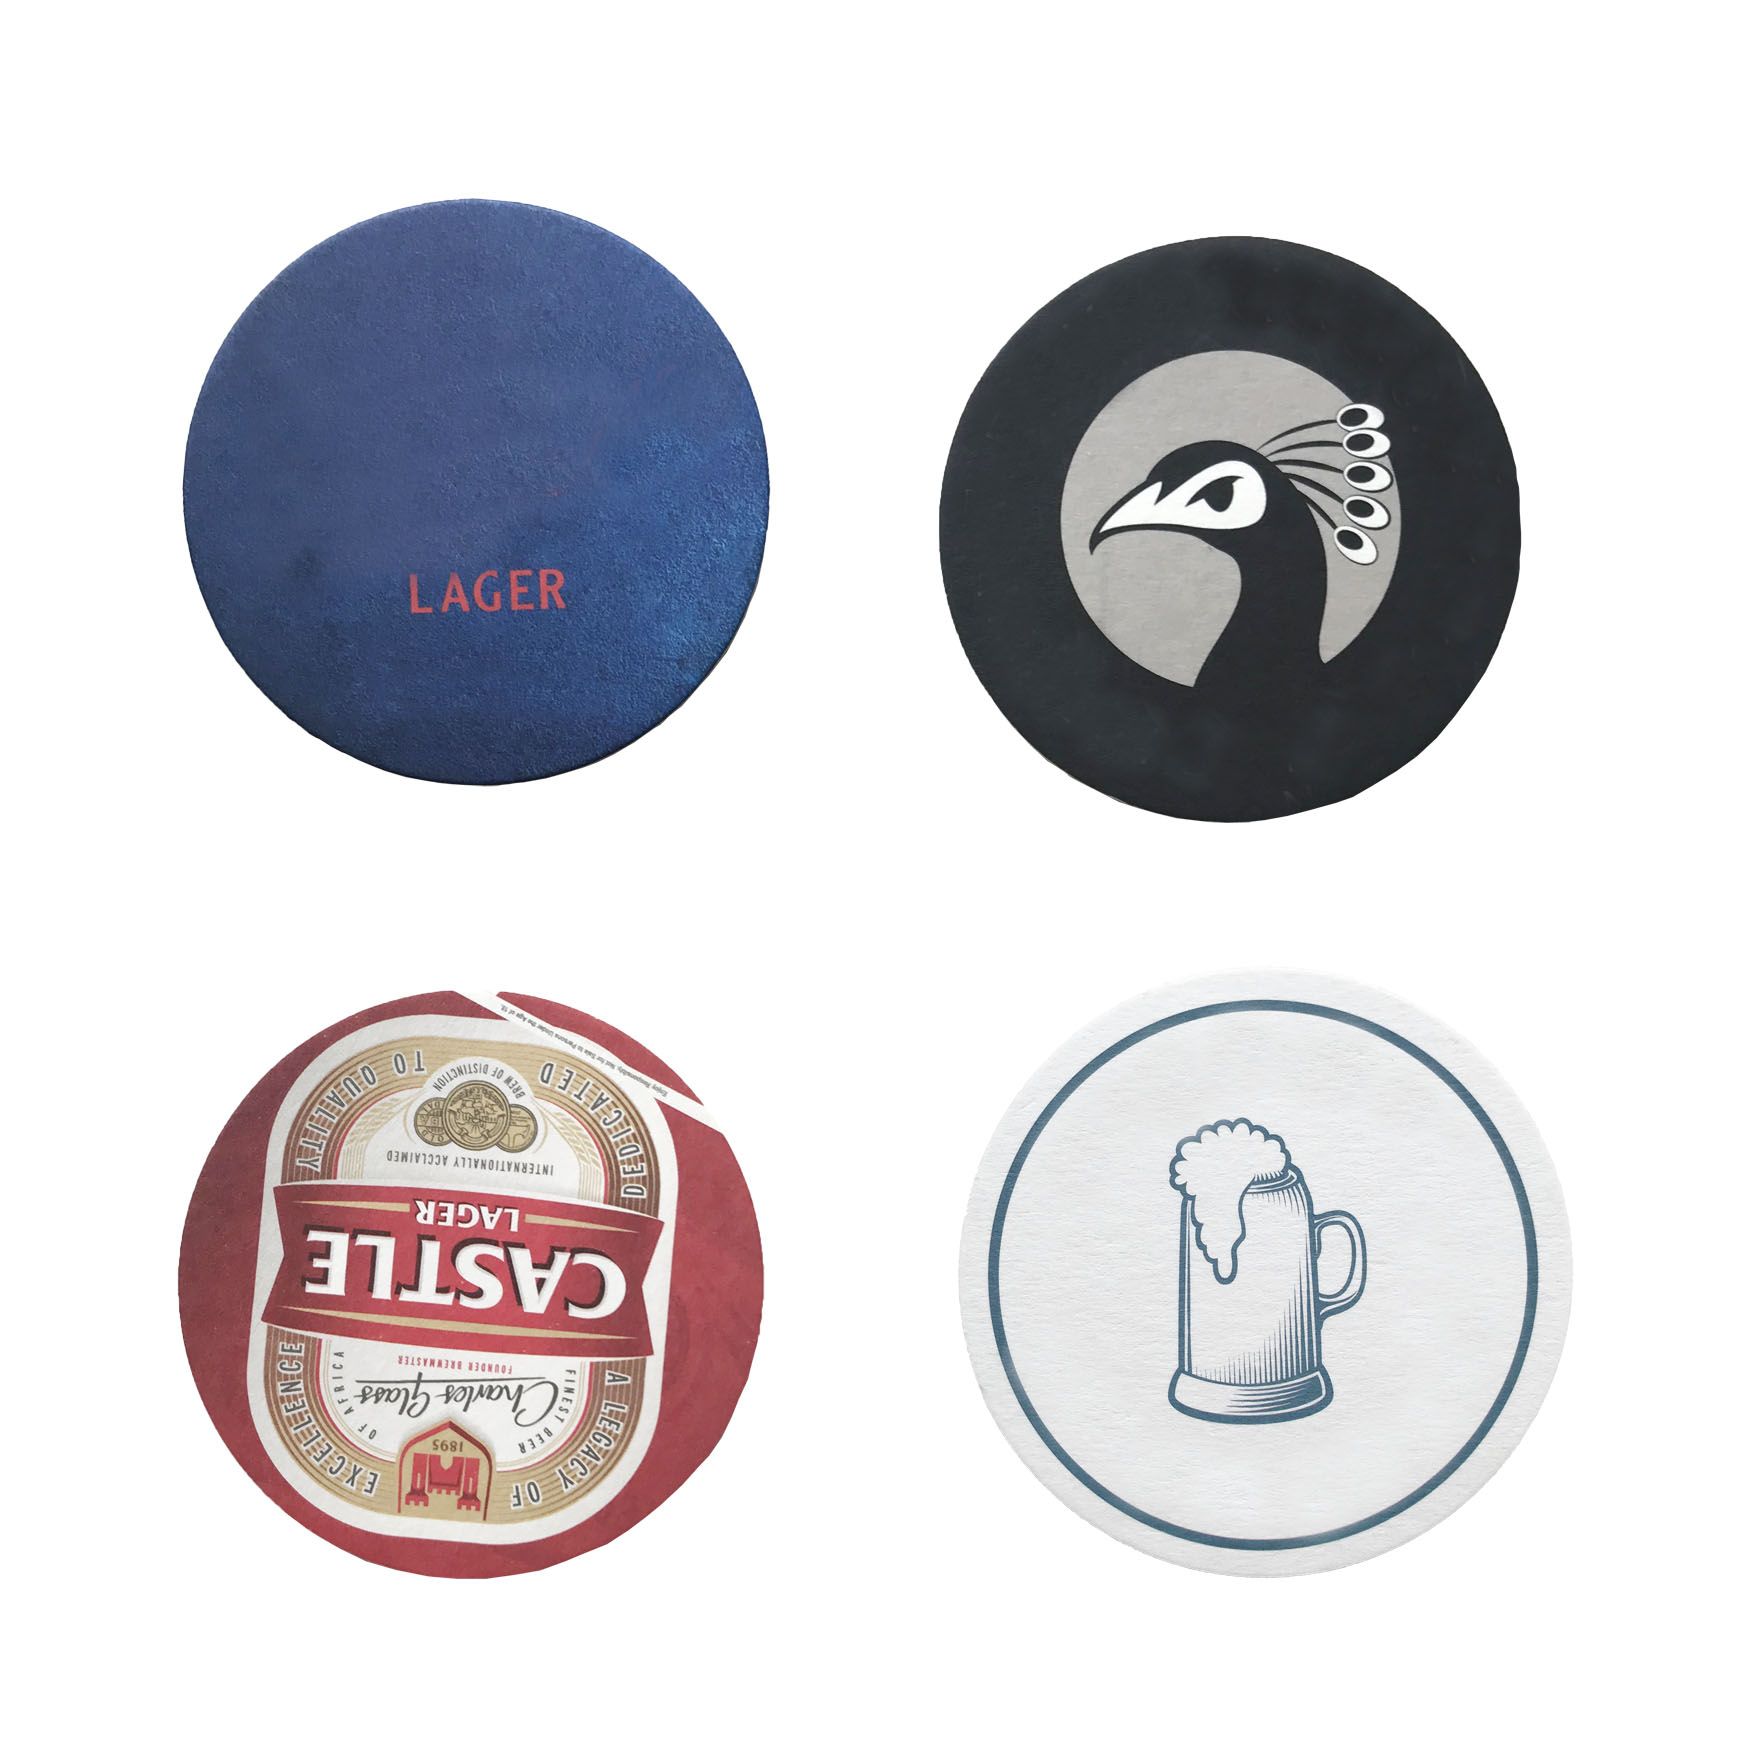 GL-AAA1575 Round Absorbent Paper Coaster